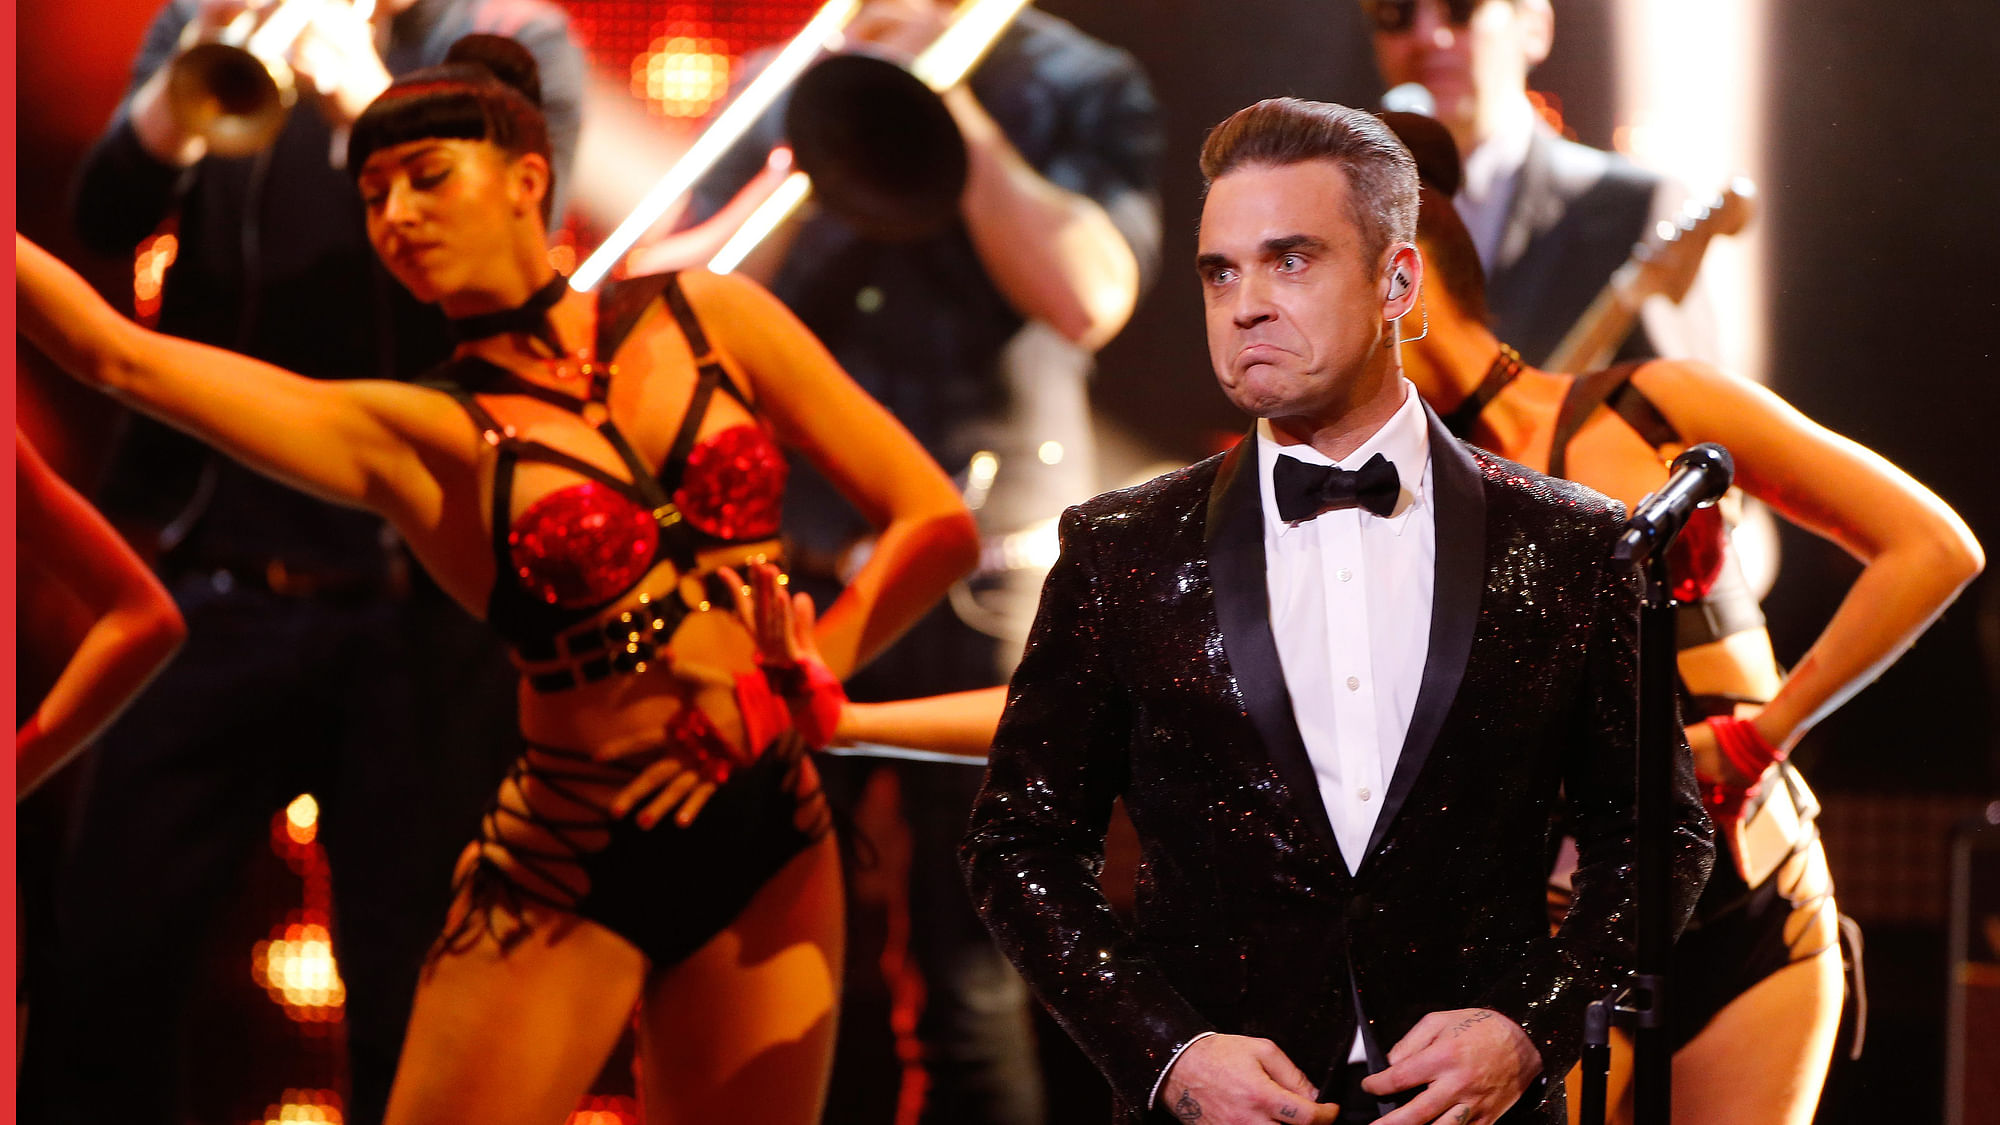 File picture of British singer Robbie Williams who will be performing at the FIFA World Cup 2018 opening ceremony in Moscow on Thursday.